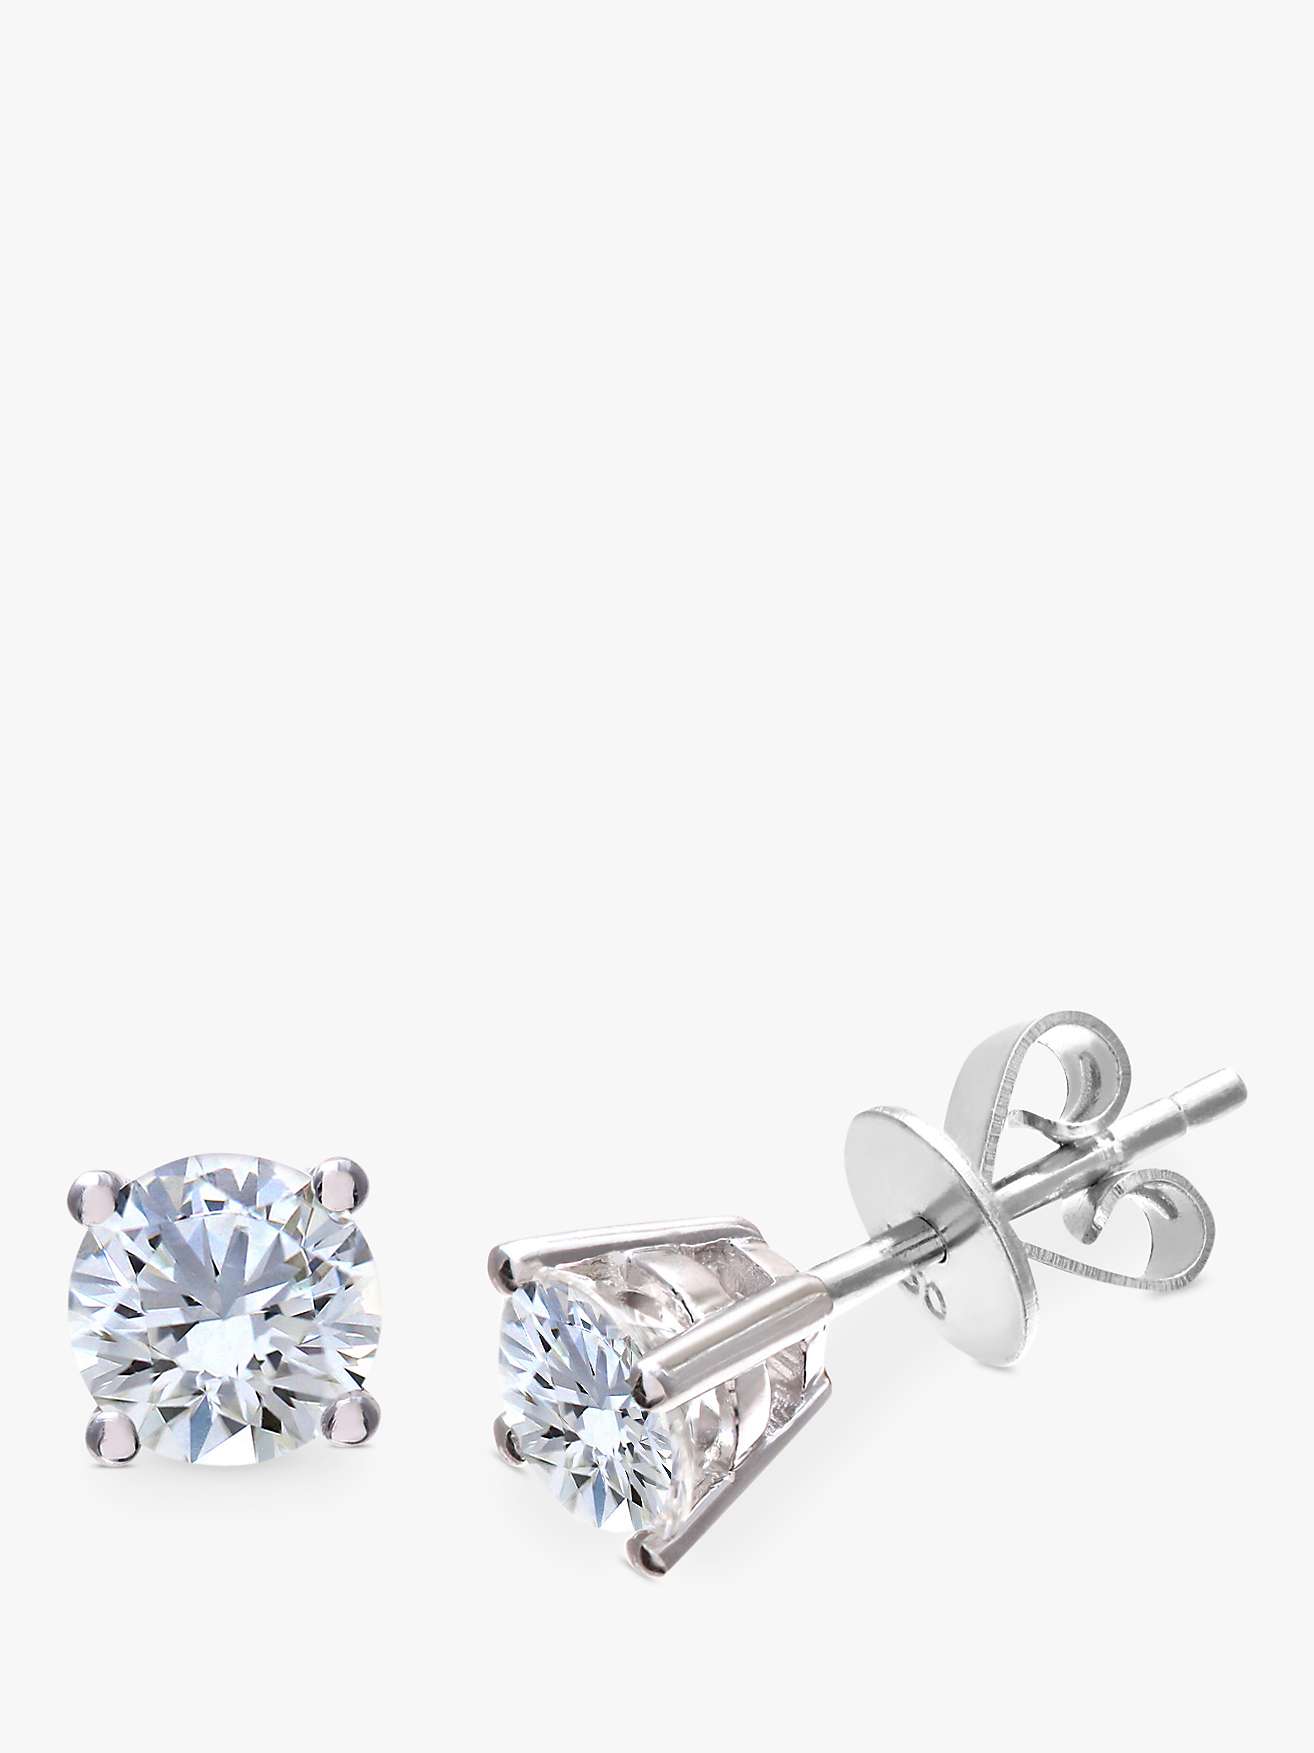 Buy Mogul 18ct White Gold Round Brilliant Solitaire Diamond Stud Earrings, 1ct Online at johnlewis.com